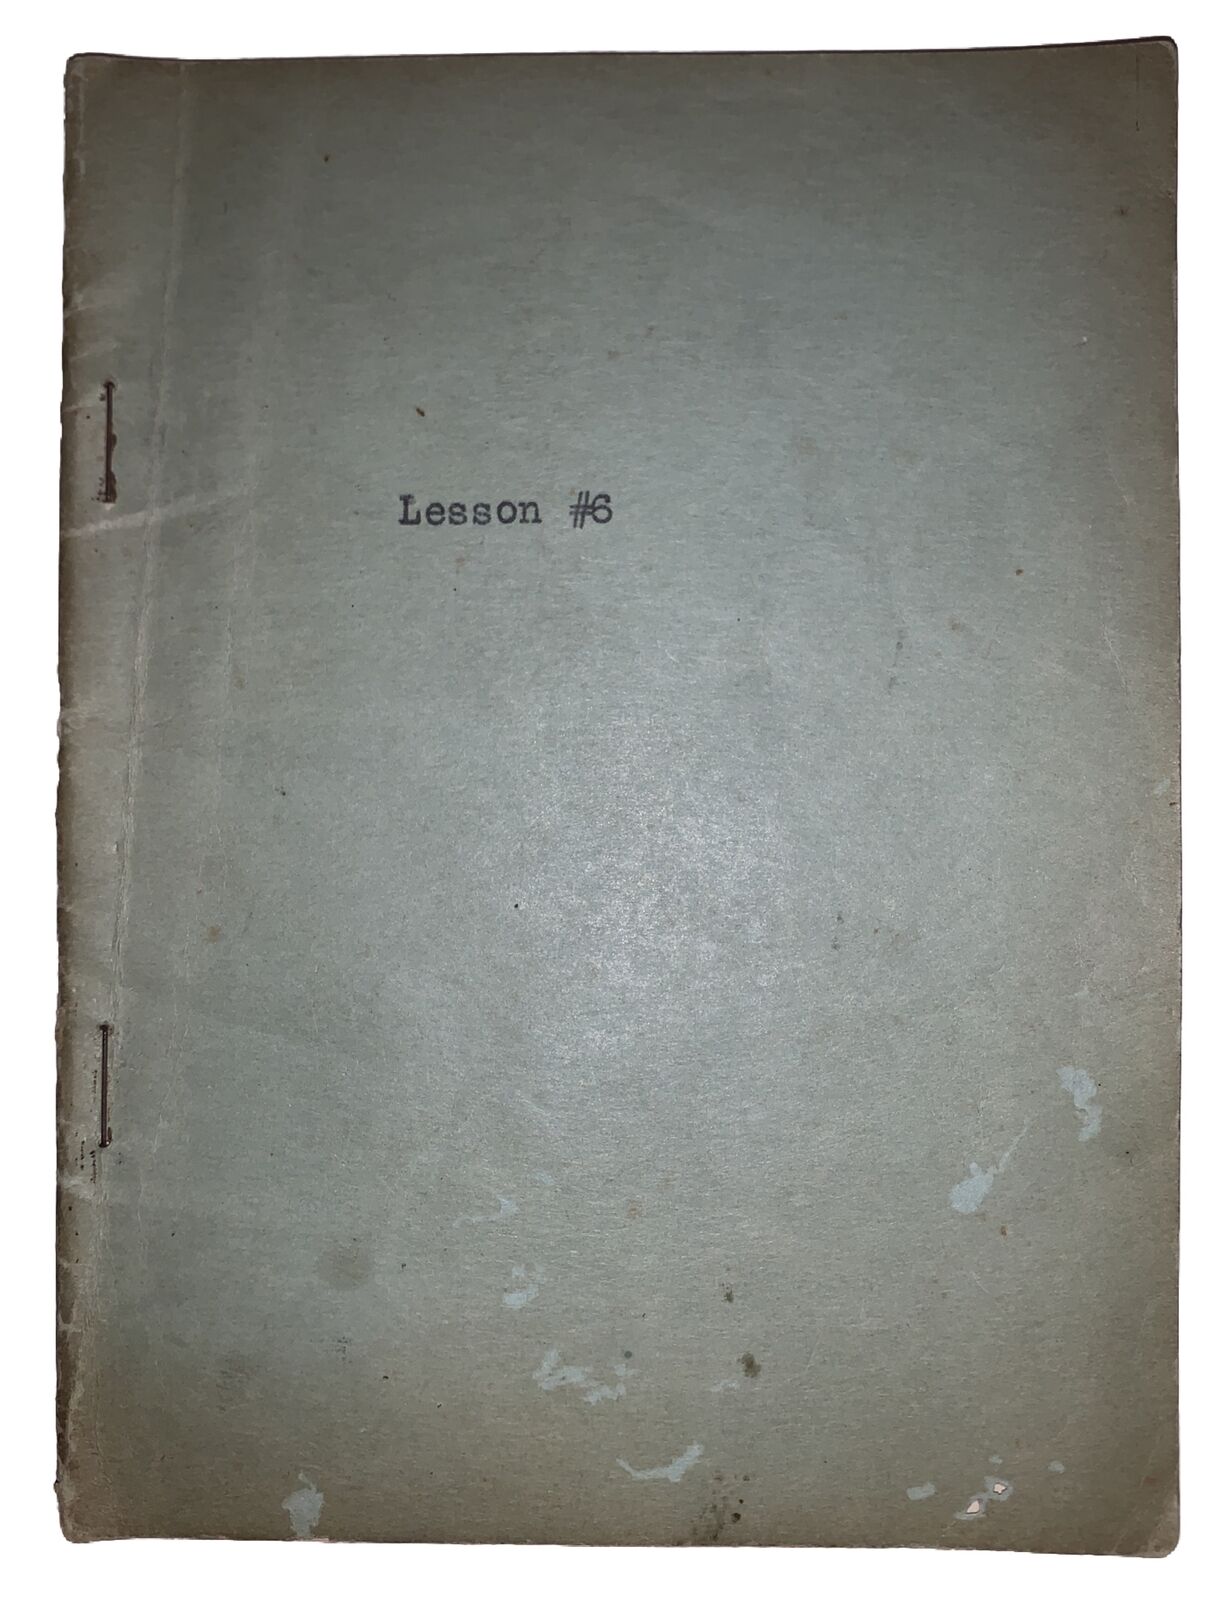 c.1919, THE LLEWELLYN COLLEGE OF ASTROLOGY, CORRESPONDENCE COURSE, LESSON No 6